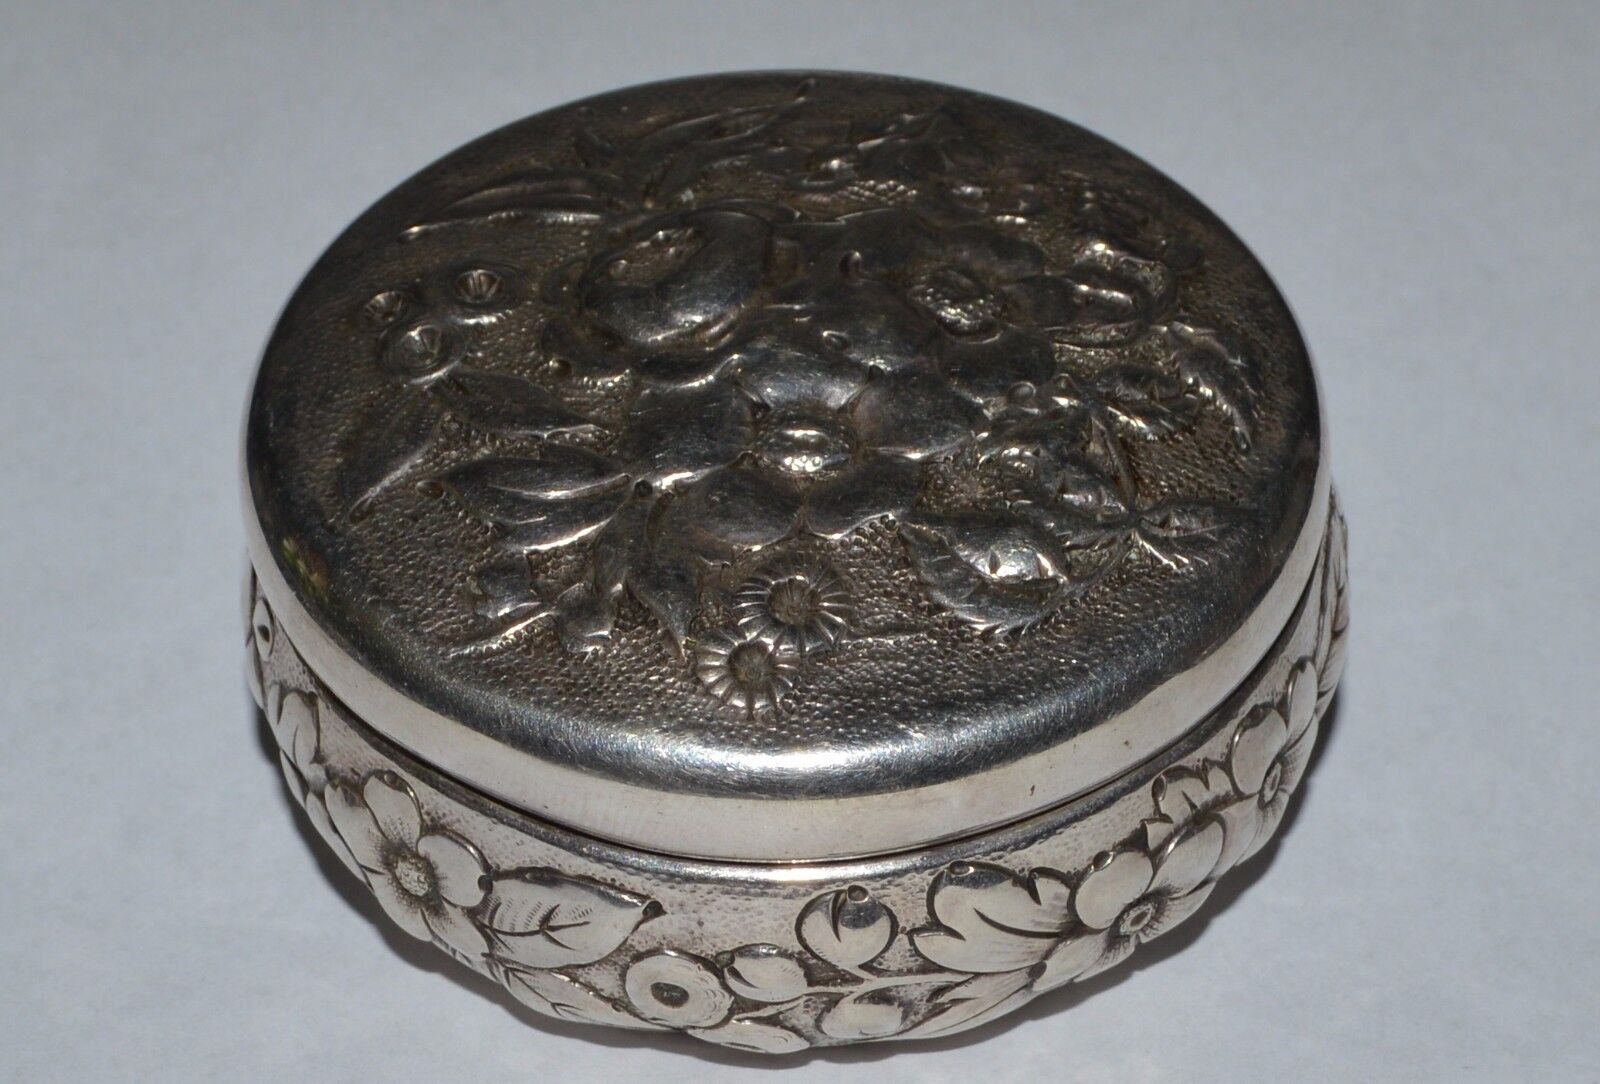 ANTIQUE WHITING STERLING SILVER FLOWERS POWDER TRINKET BOX